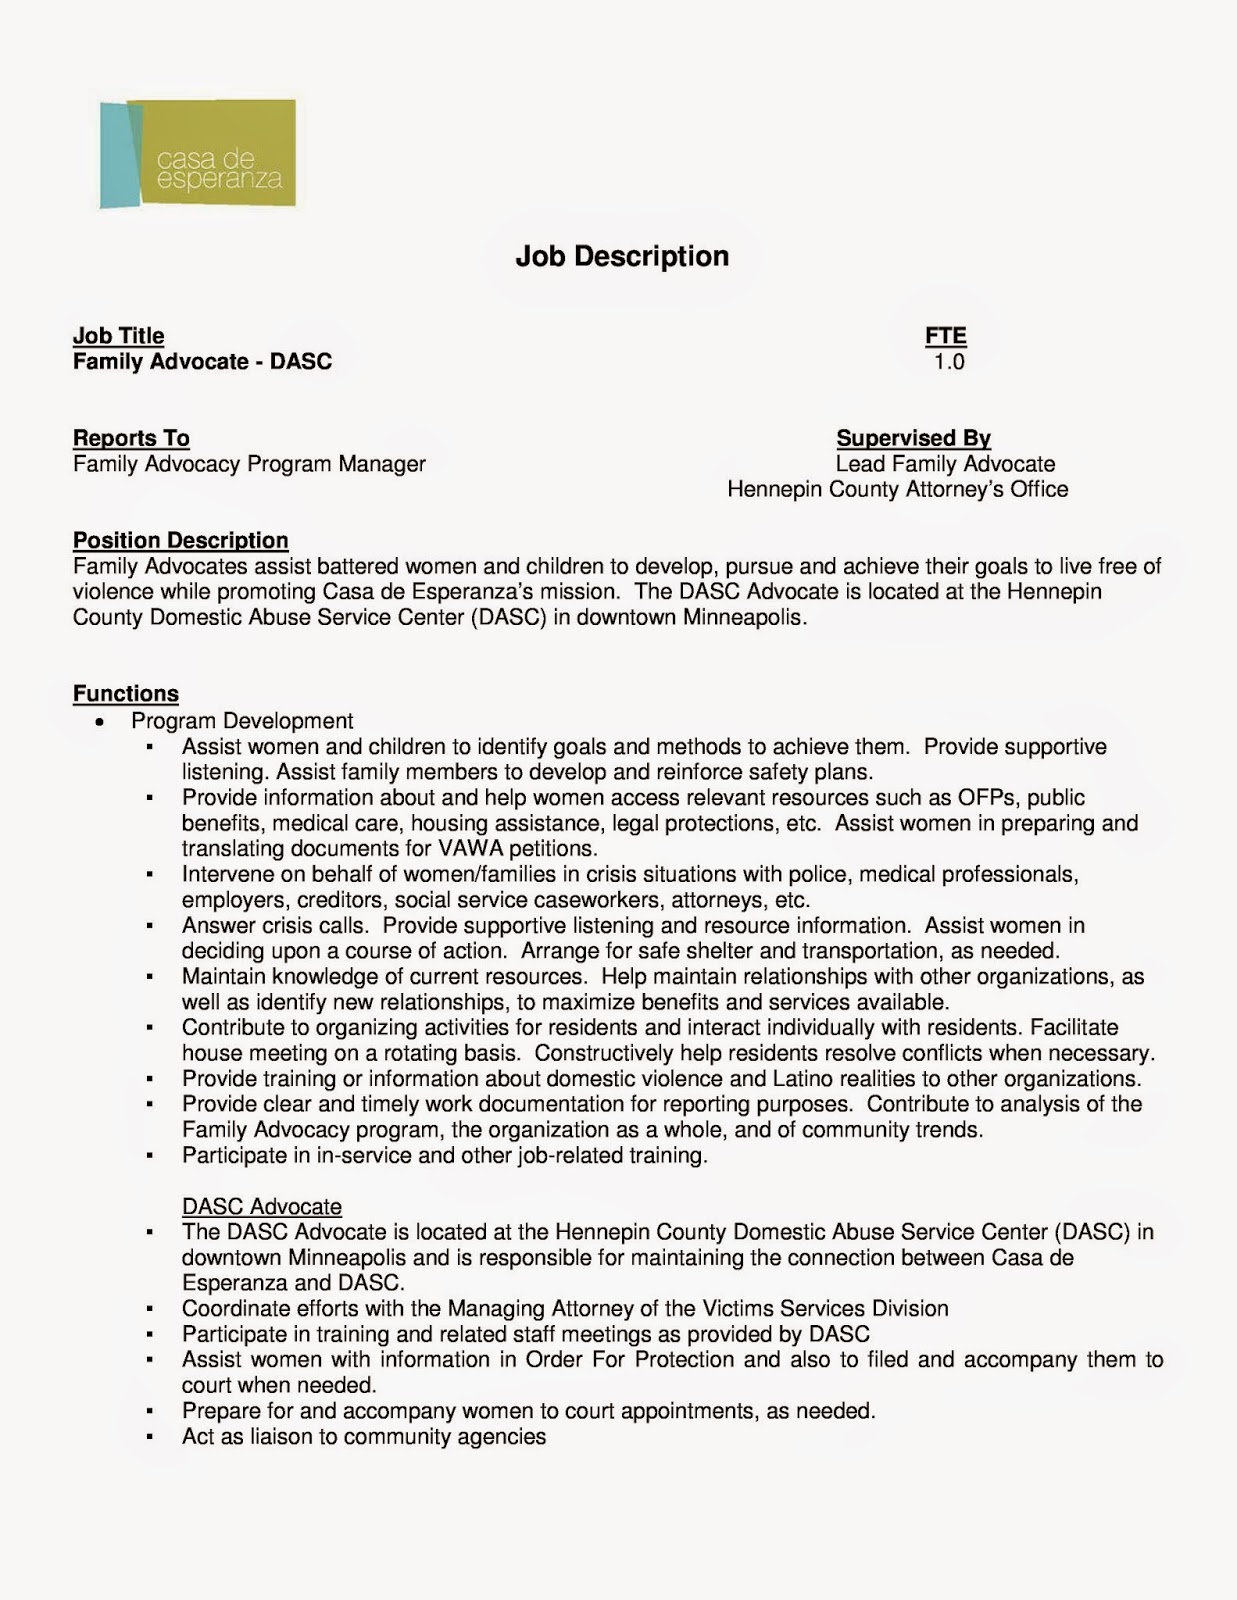 Chemical dependency counselor resume example